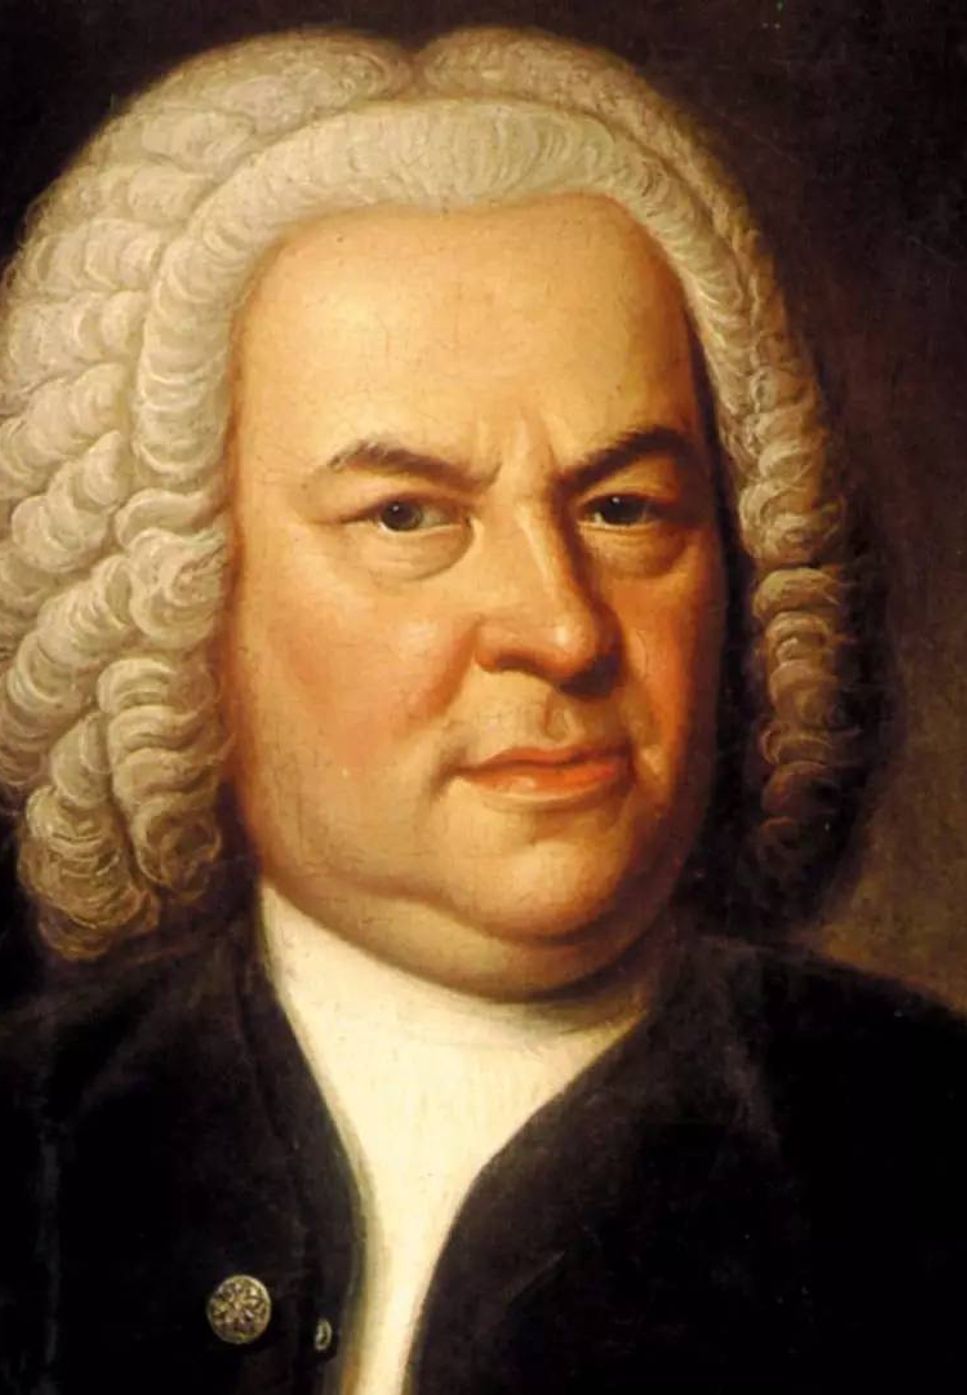 Johann Sebastian Bach - Air on the G String (Orchestral Suite No. 3 In D  Major - BWV 1068 - For Piano Solo) by poon